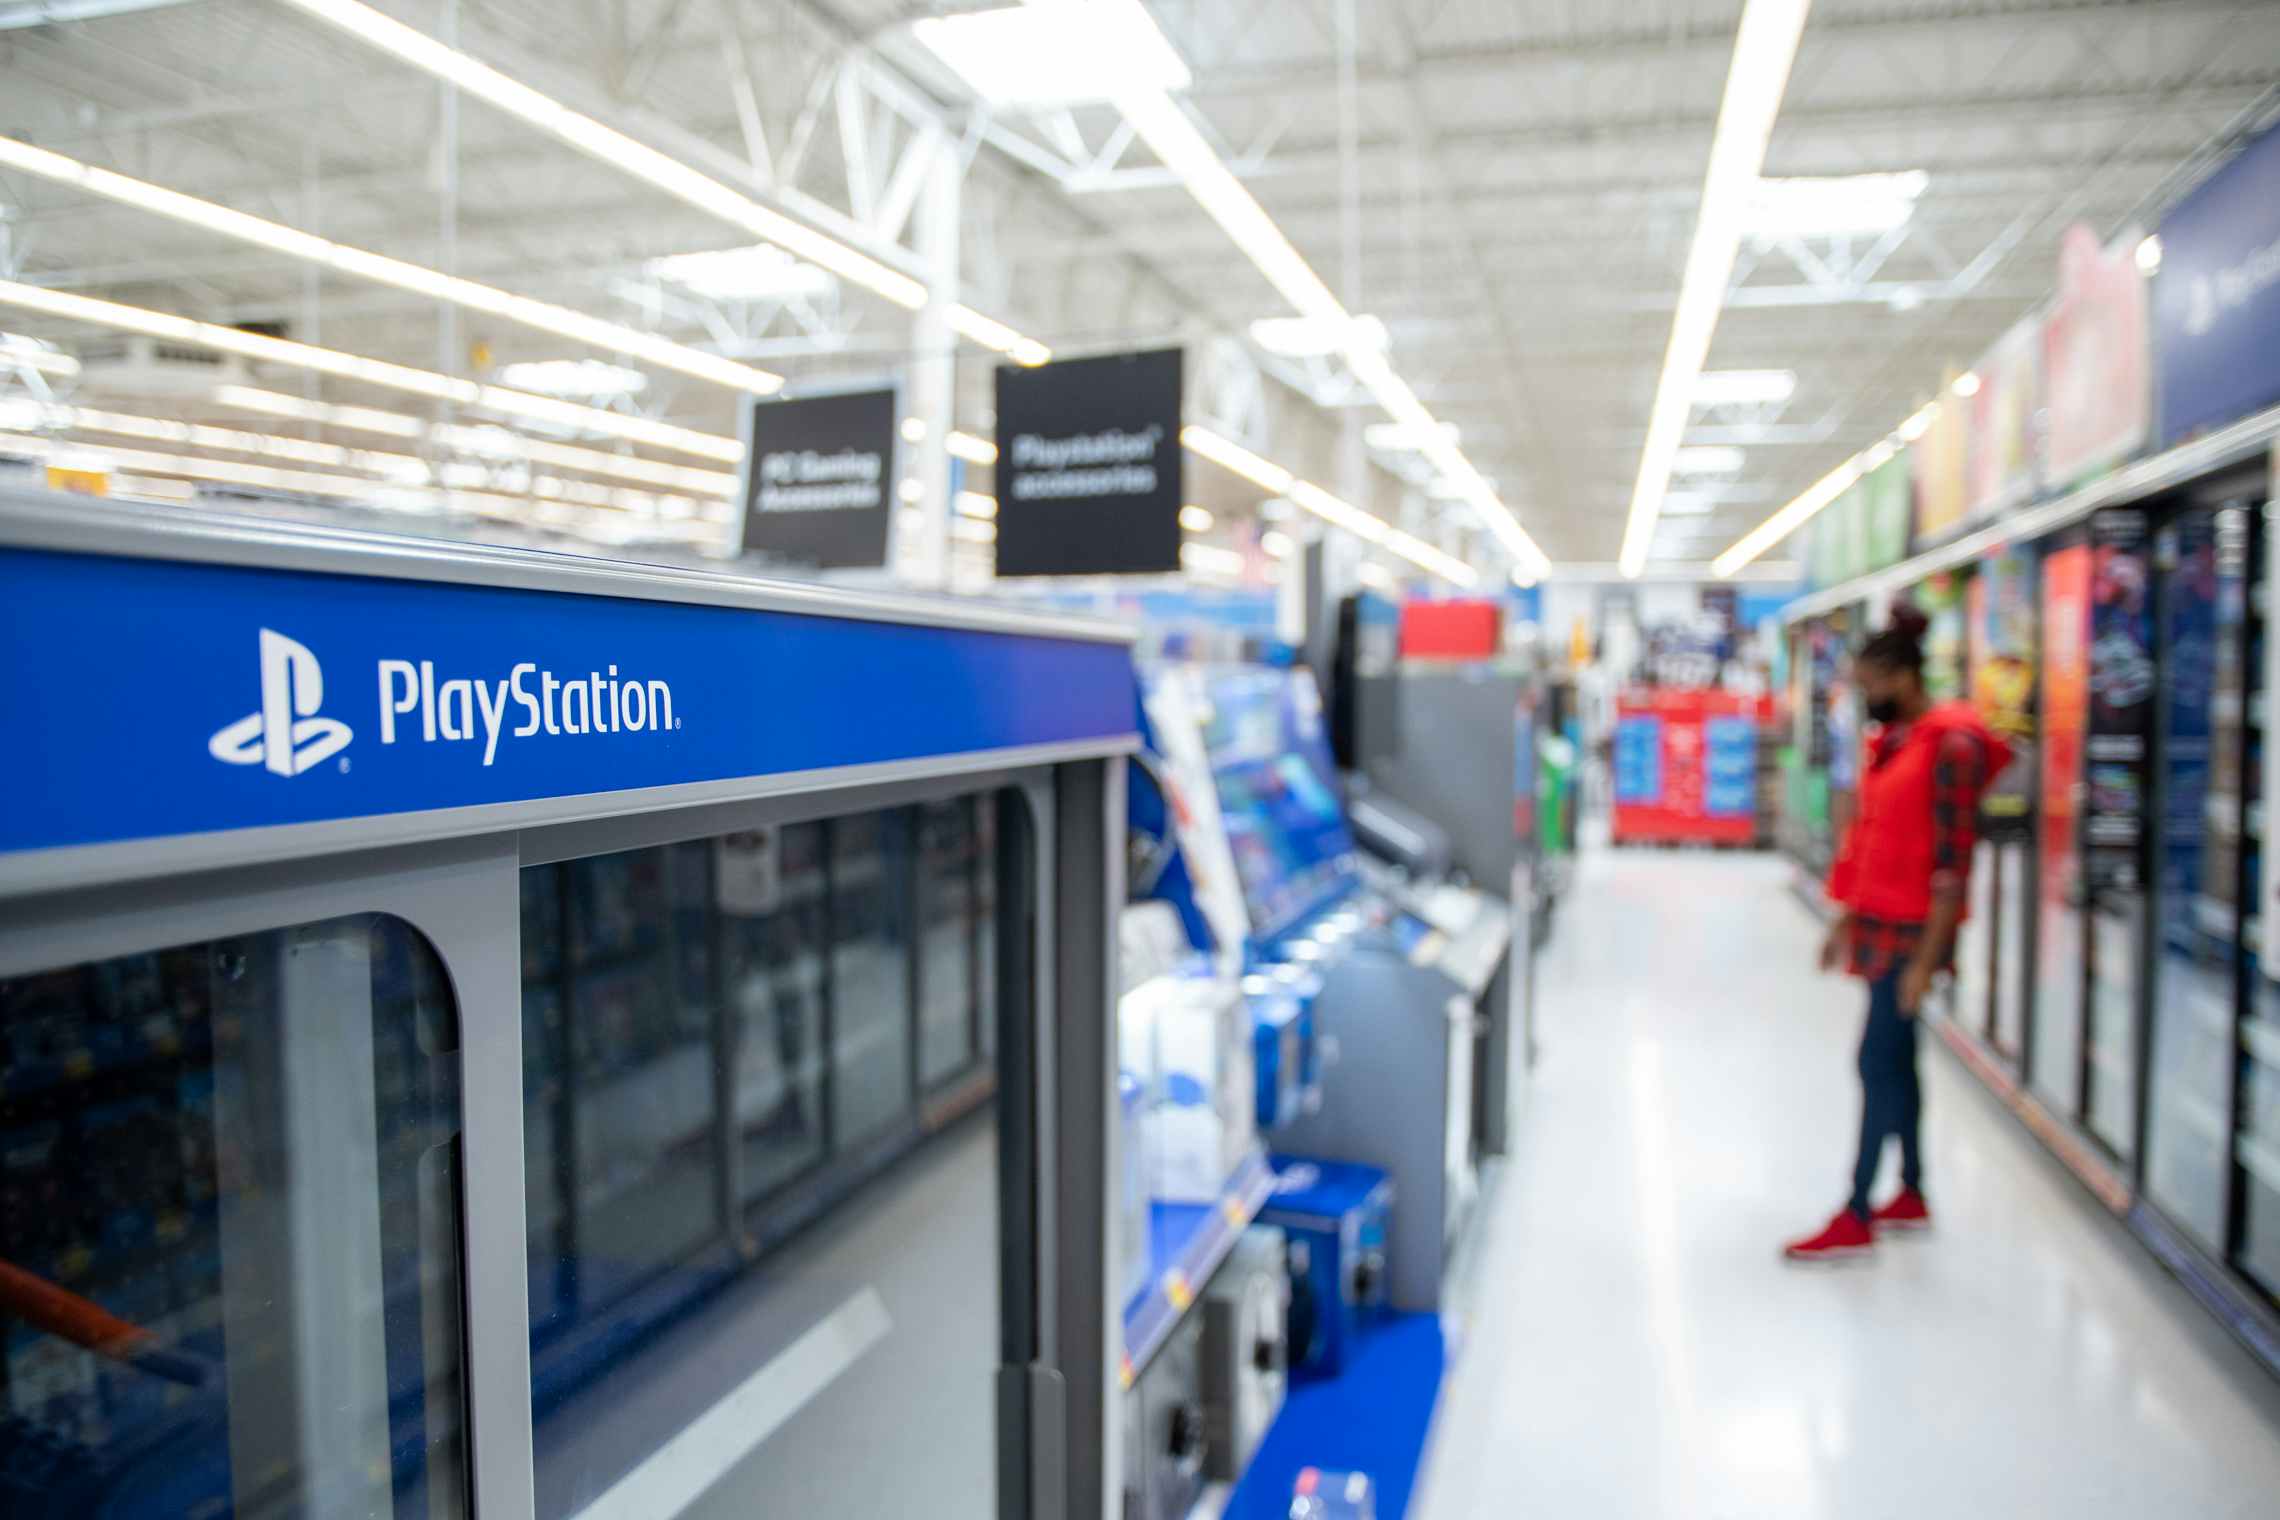 A person shopping in the PlayStation aisle at Walmart.